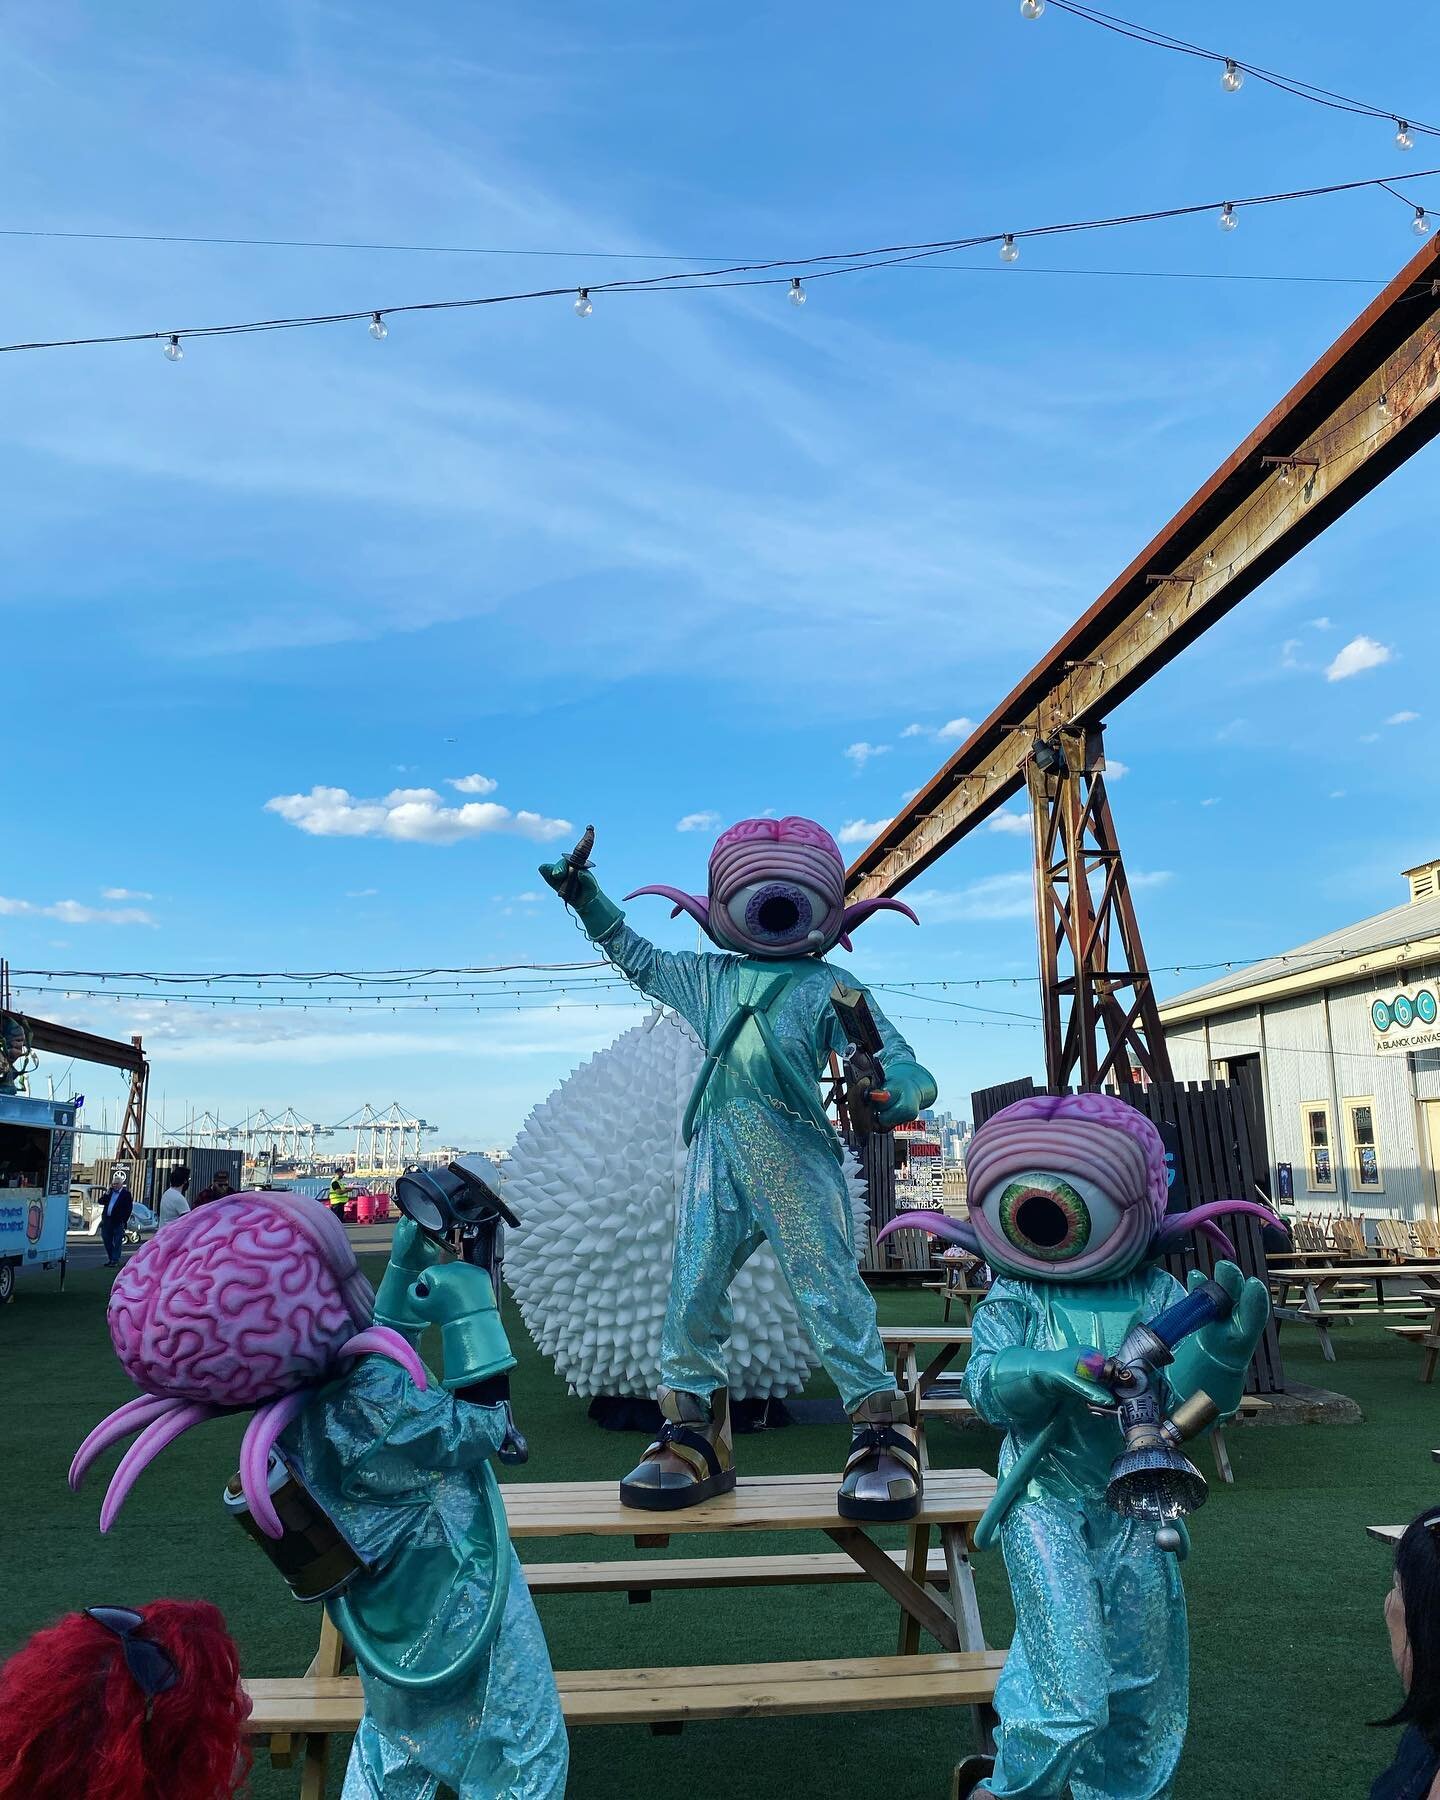 Do not miss Puppet Mayhem 2 &mdash; on now at @seaworkswilliamstown for four nights only! 

This incredible event from superstar puppetry company @ablanckcanvas has something for everyone &mdash; from live performances and DJs, to food trucks and fac